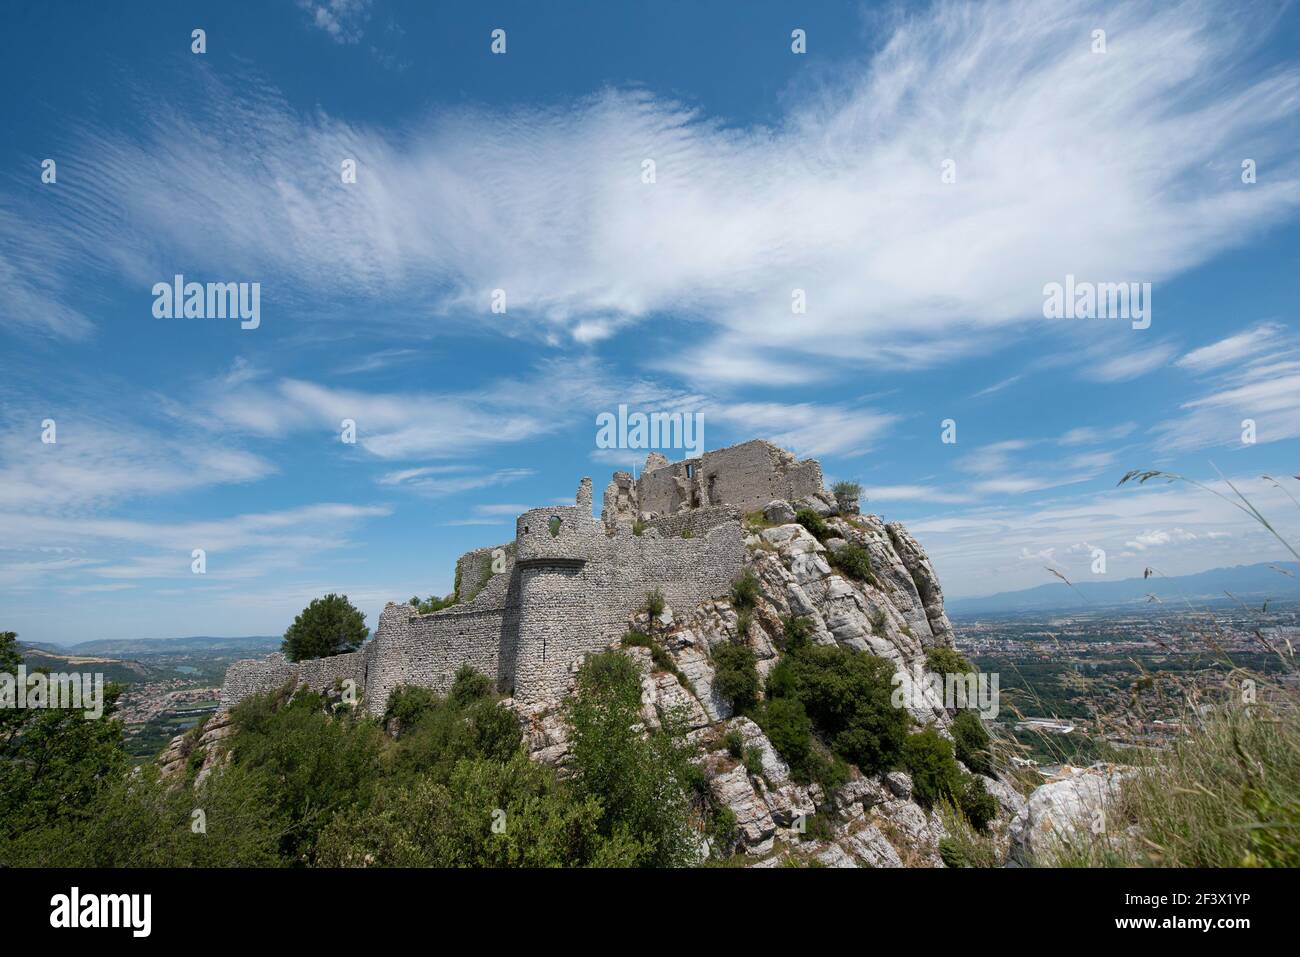 Saint-Peray (south-eastern France): ruins of the Chateau de Crussol, medieval fortress dating back to the 12th century registered as a National Histor Stock Photo